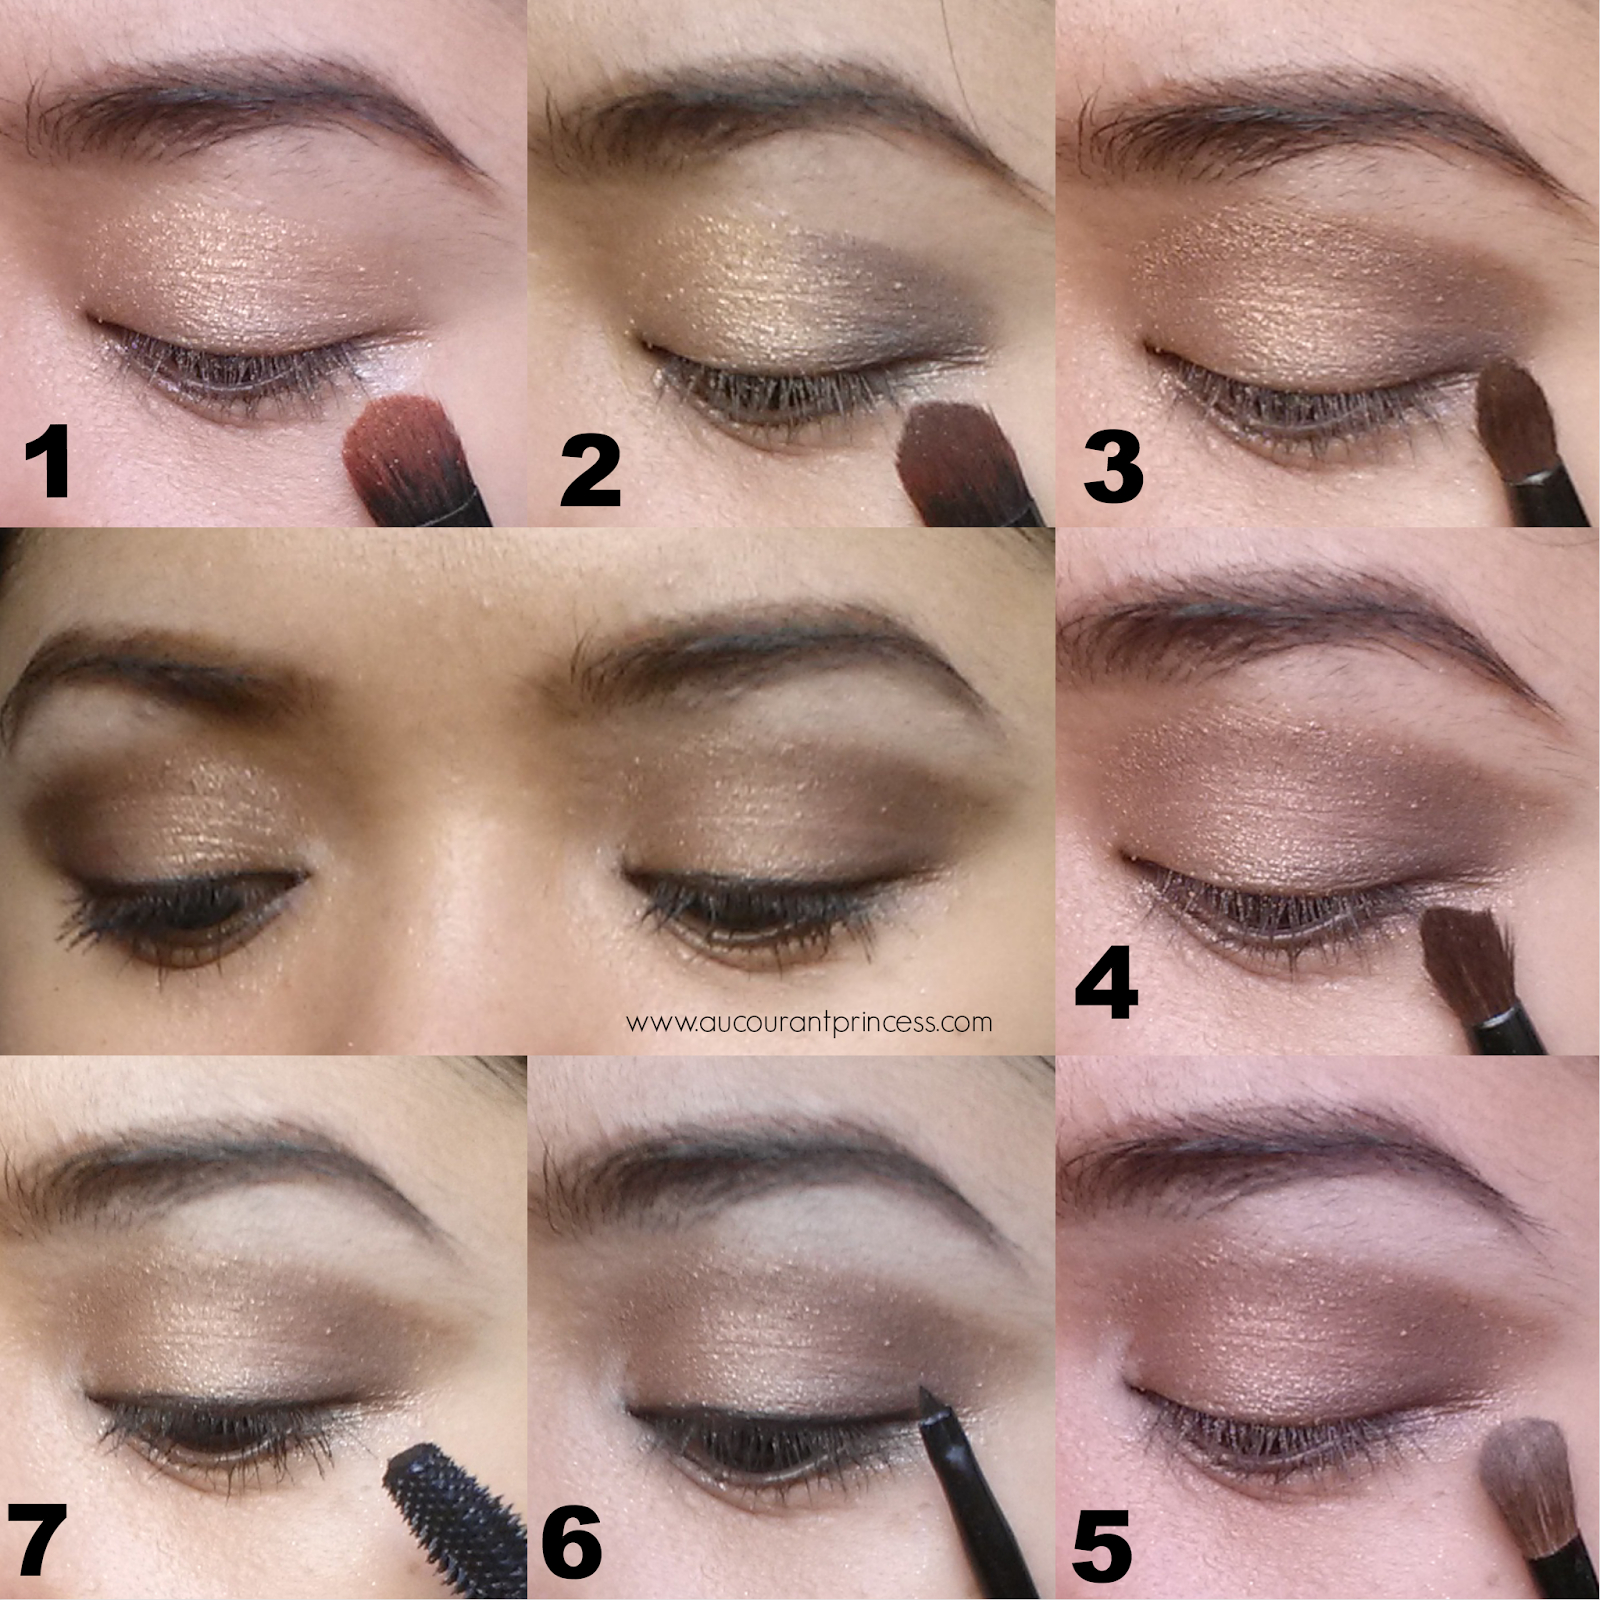 How To Apply Eye Makeup With Pictures A Glad Diary How To Apply Basic Eye Makeup